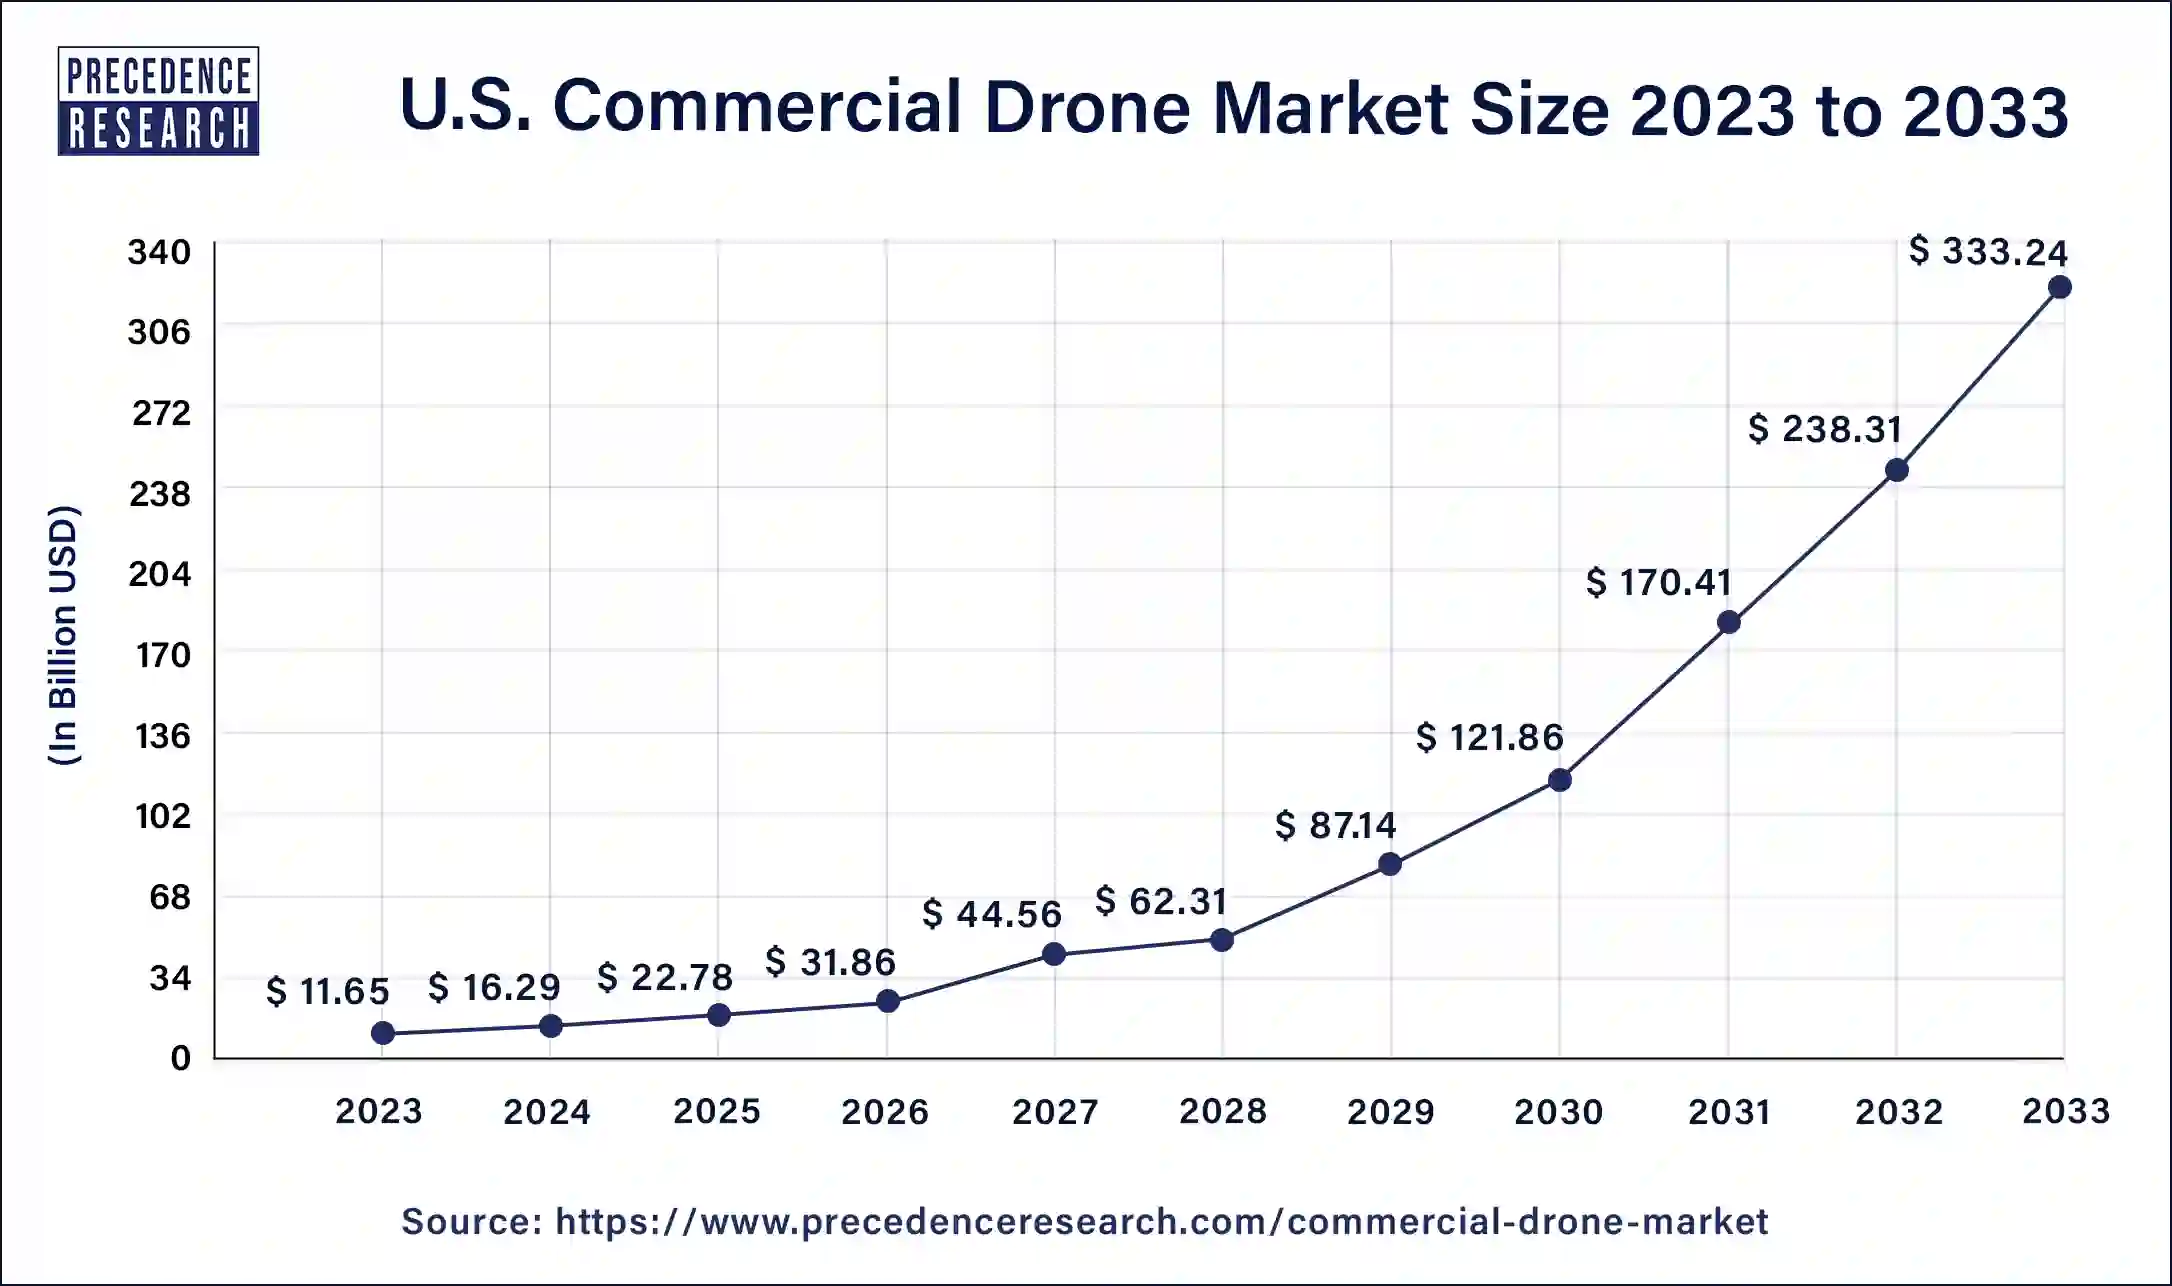 U.S. Commercial Drone Market Size 2024 to 2033